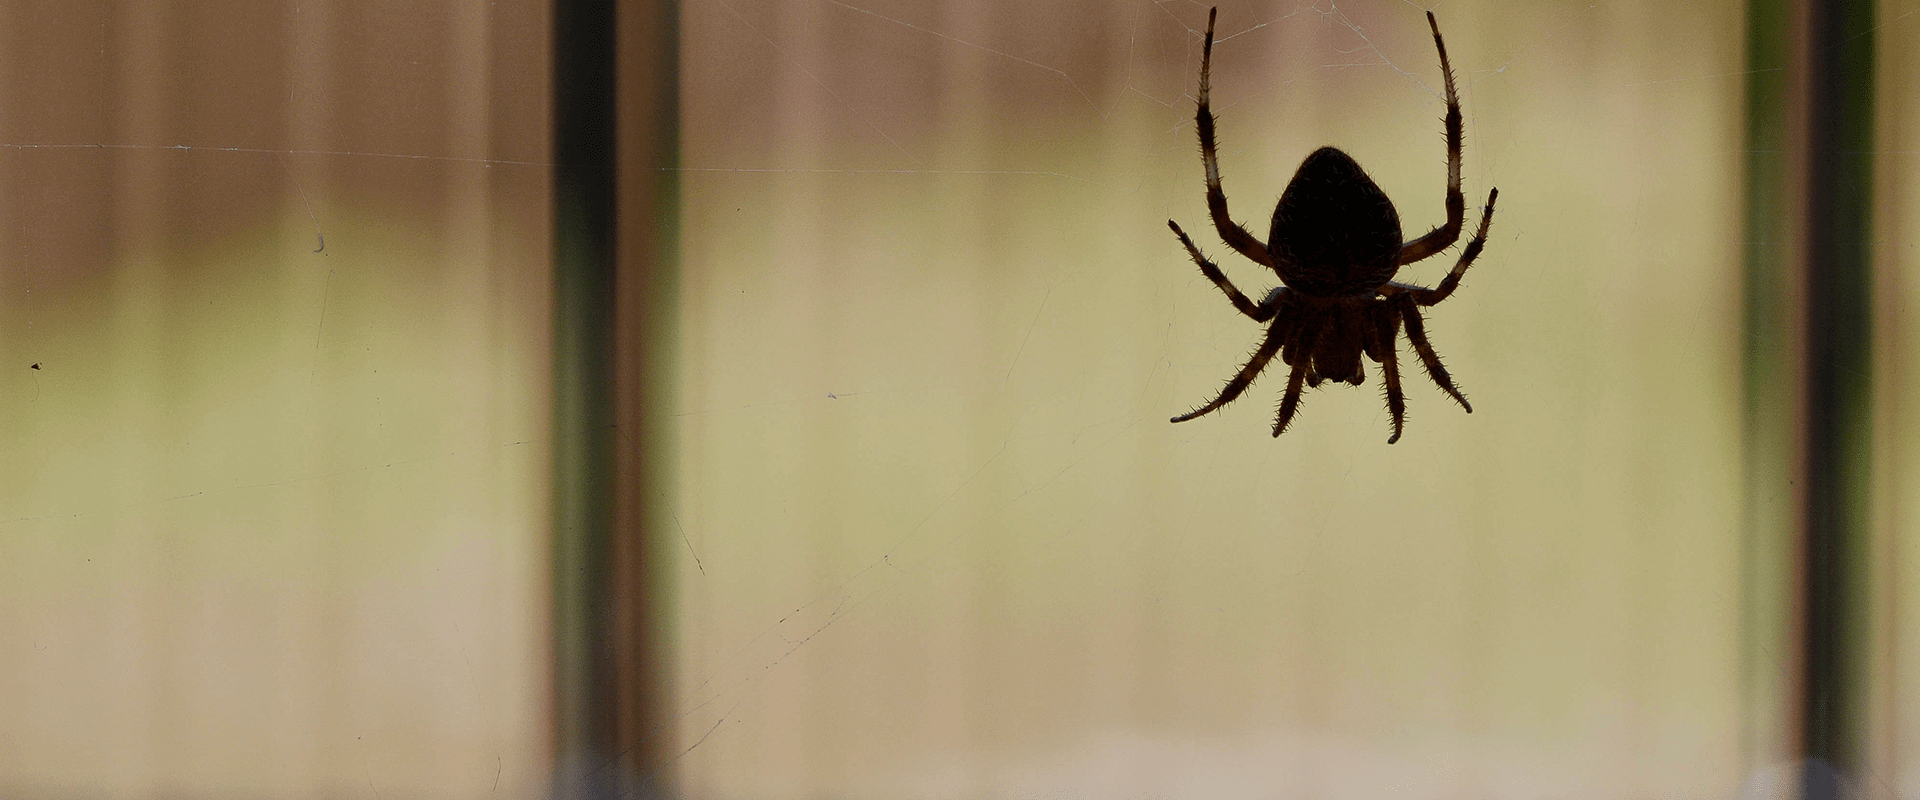 baltimore home infested with spiders